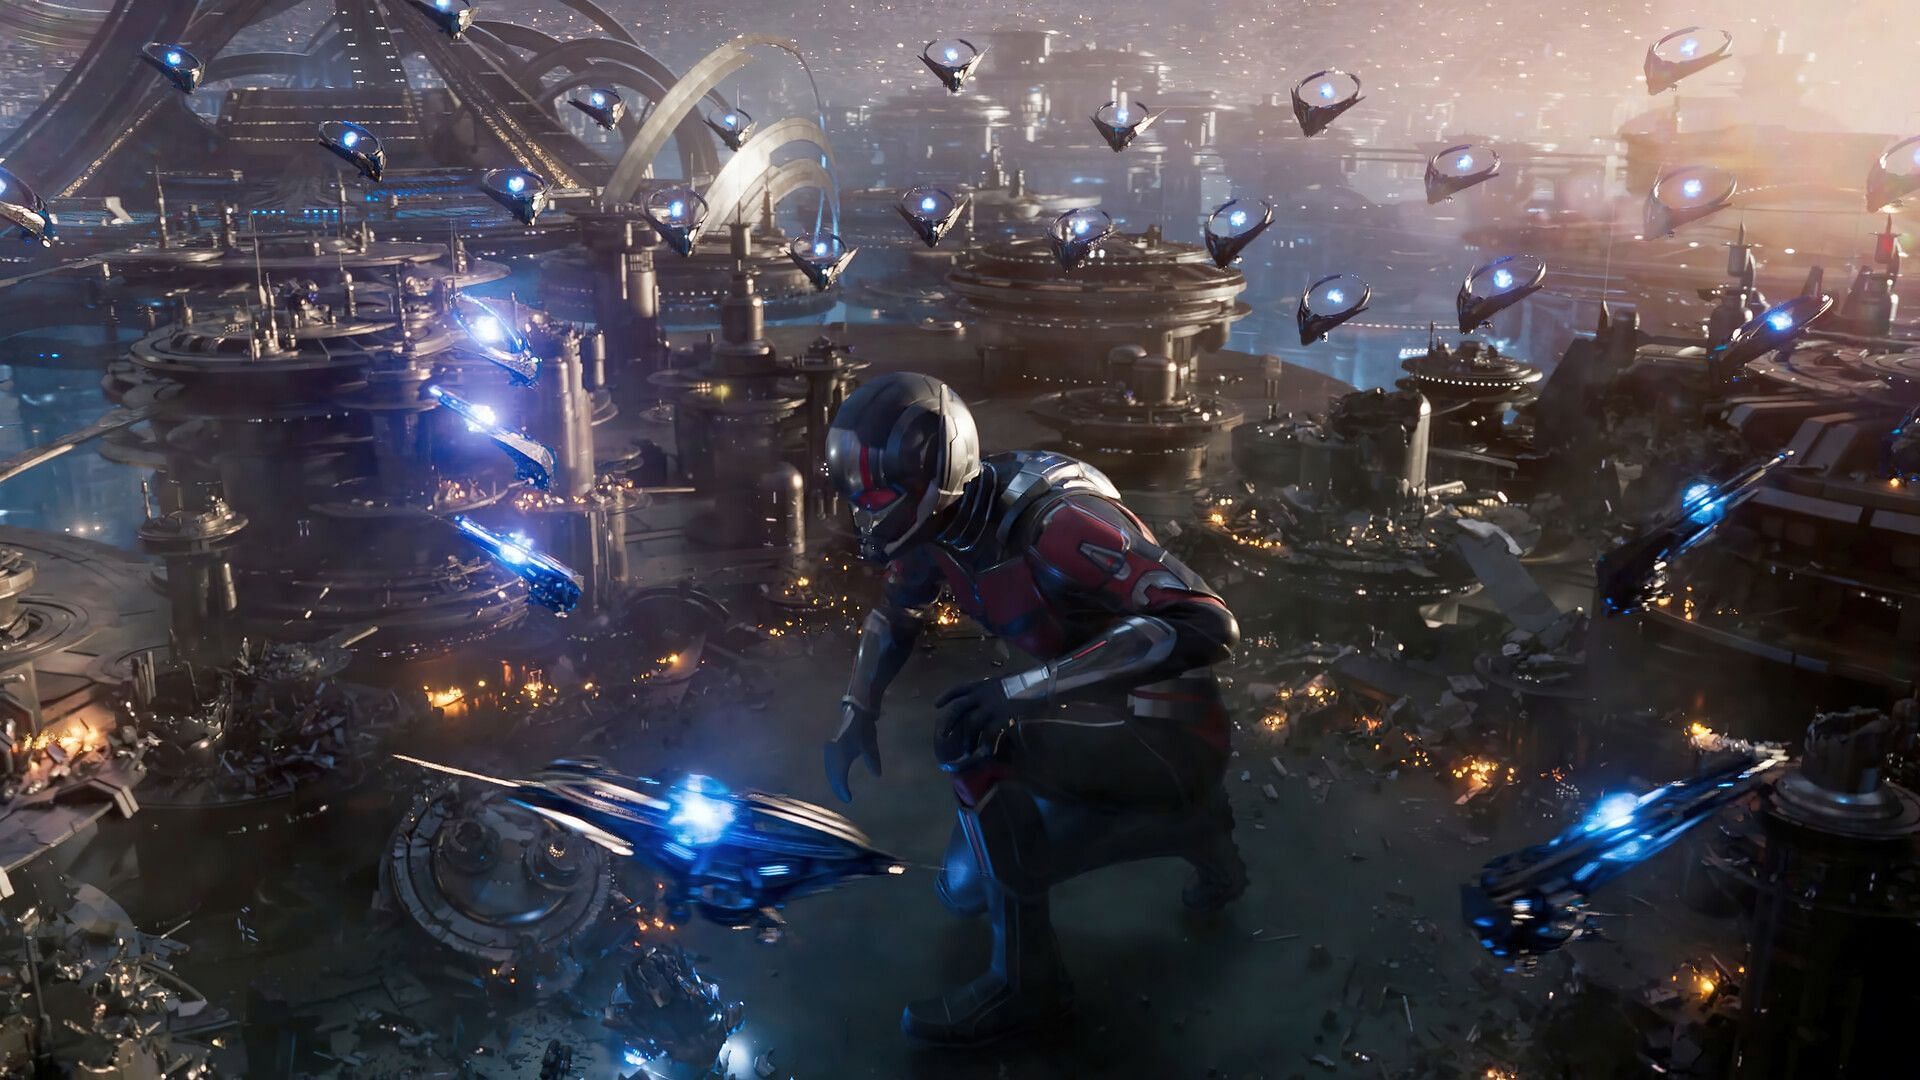 Ant-Man in the Quantum Realm in Ant-Man and the Wasp: Quantumania (Image Credit: Marvel Studios)